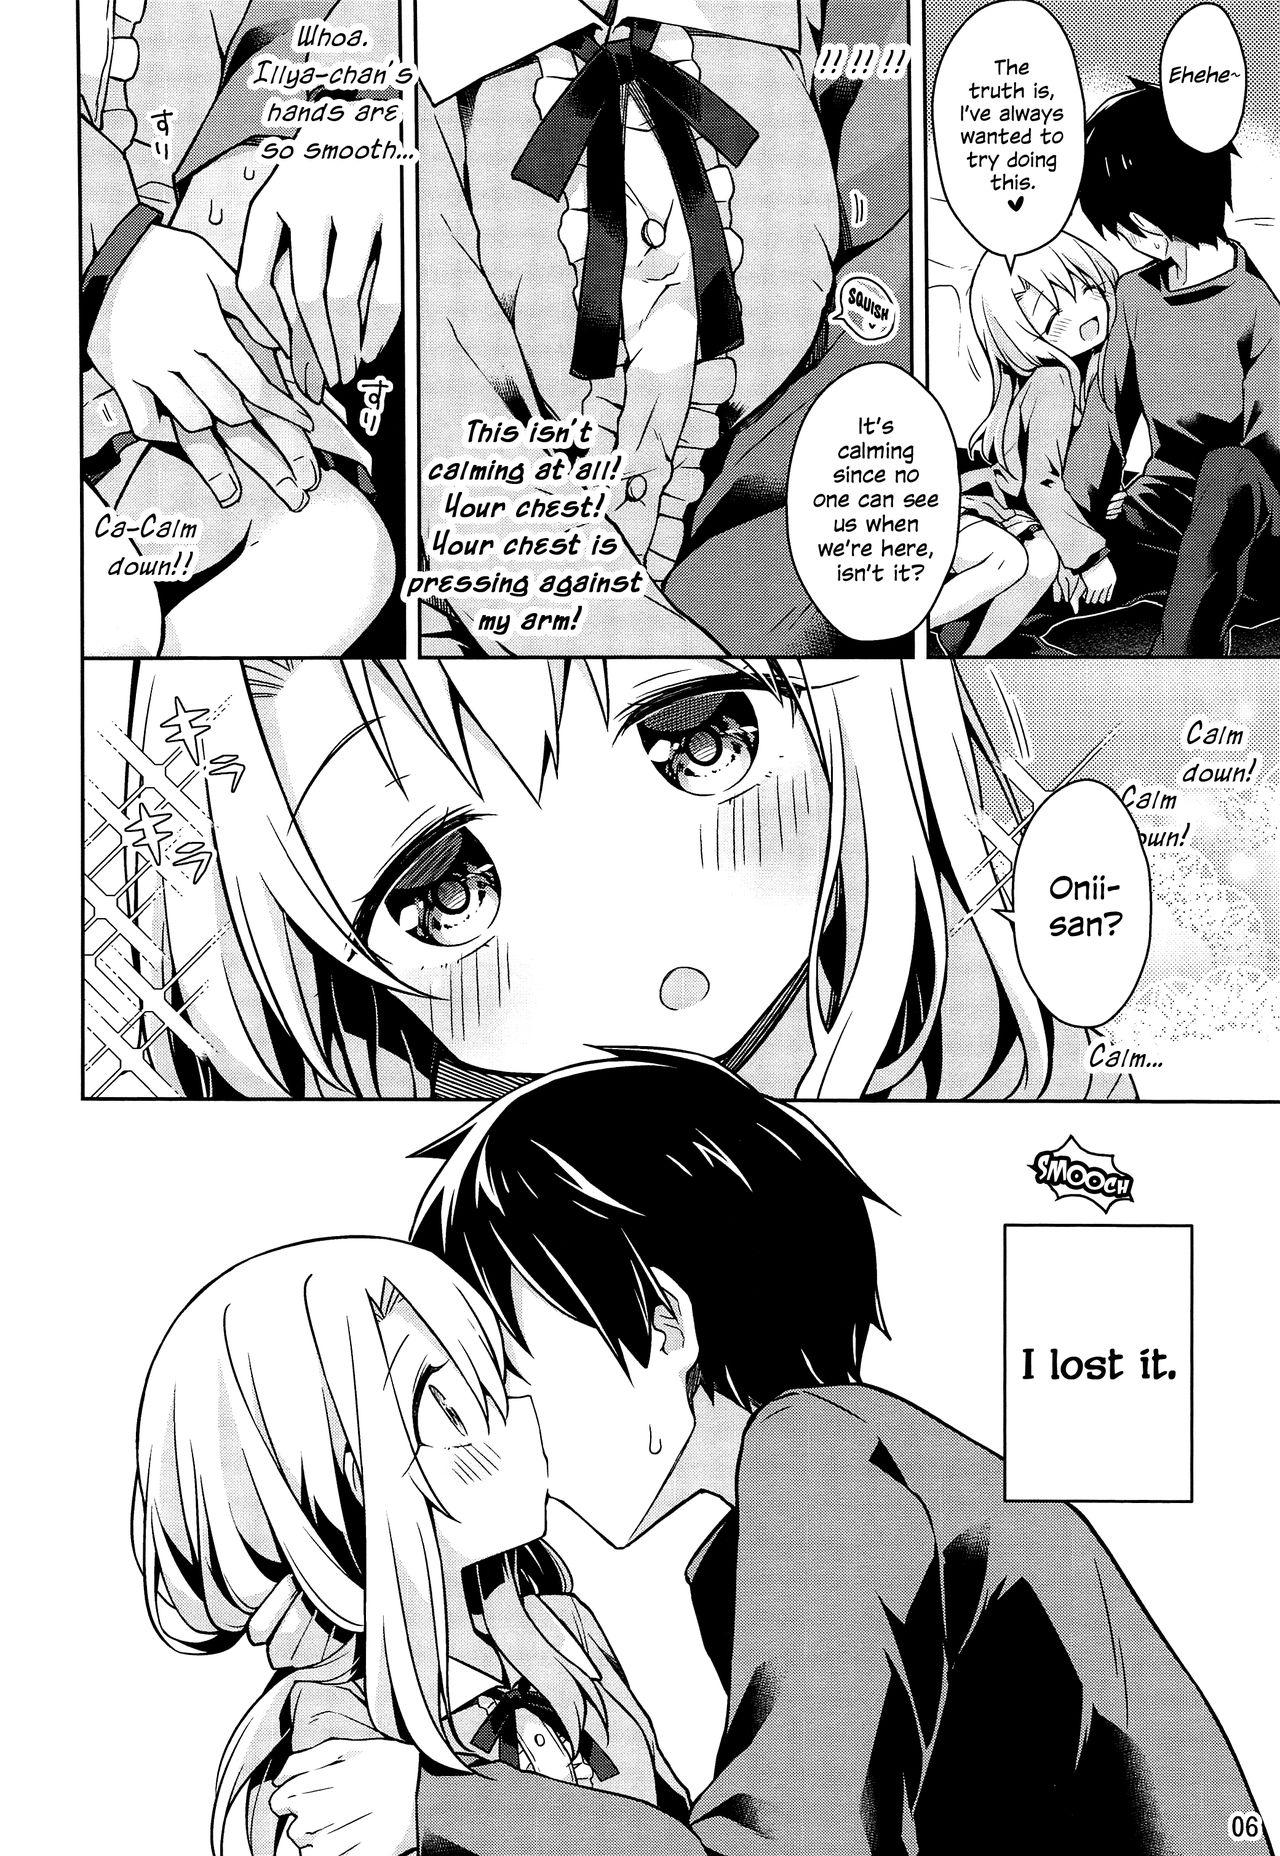 Latin Illya to Ouchi de Ecchi Shitai!! | I Want To Make Love With Illya At My Place!! - Fate kaleid liner prisma illya Doublepenetration - Page 7